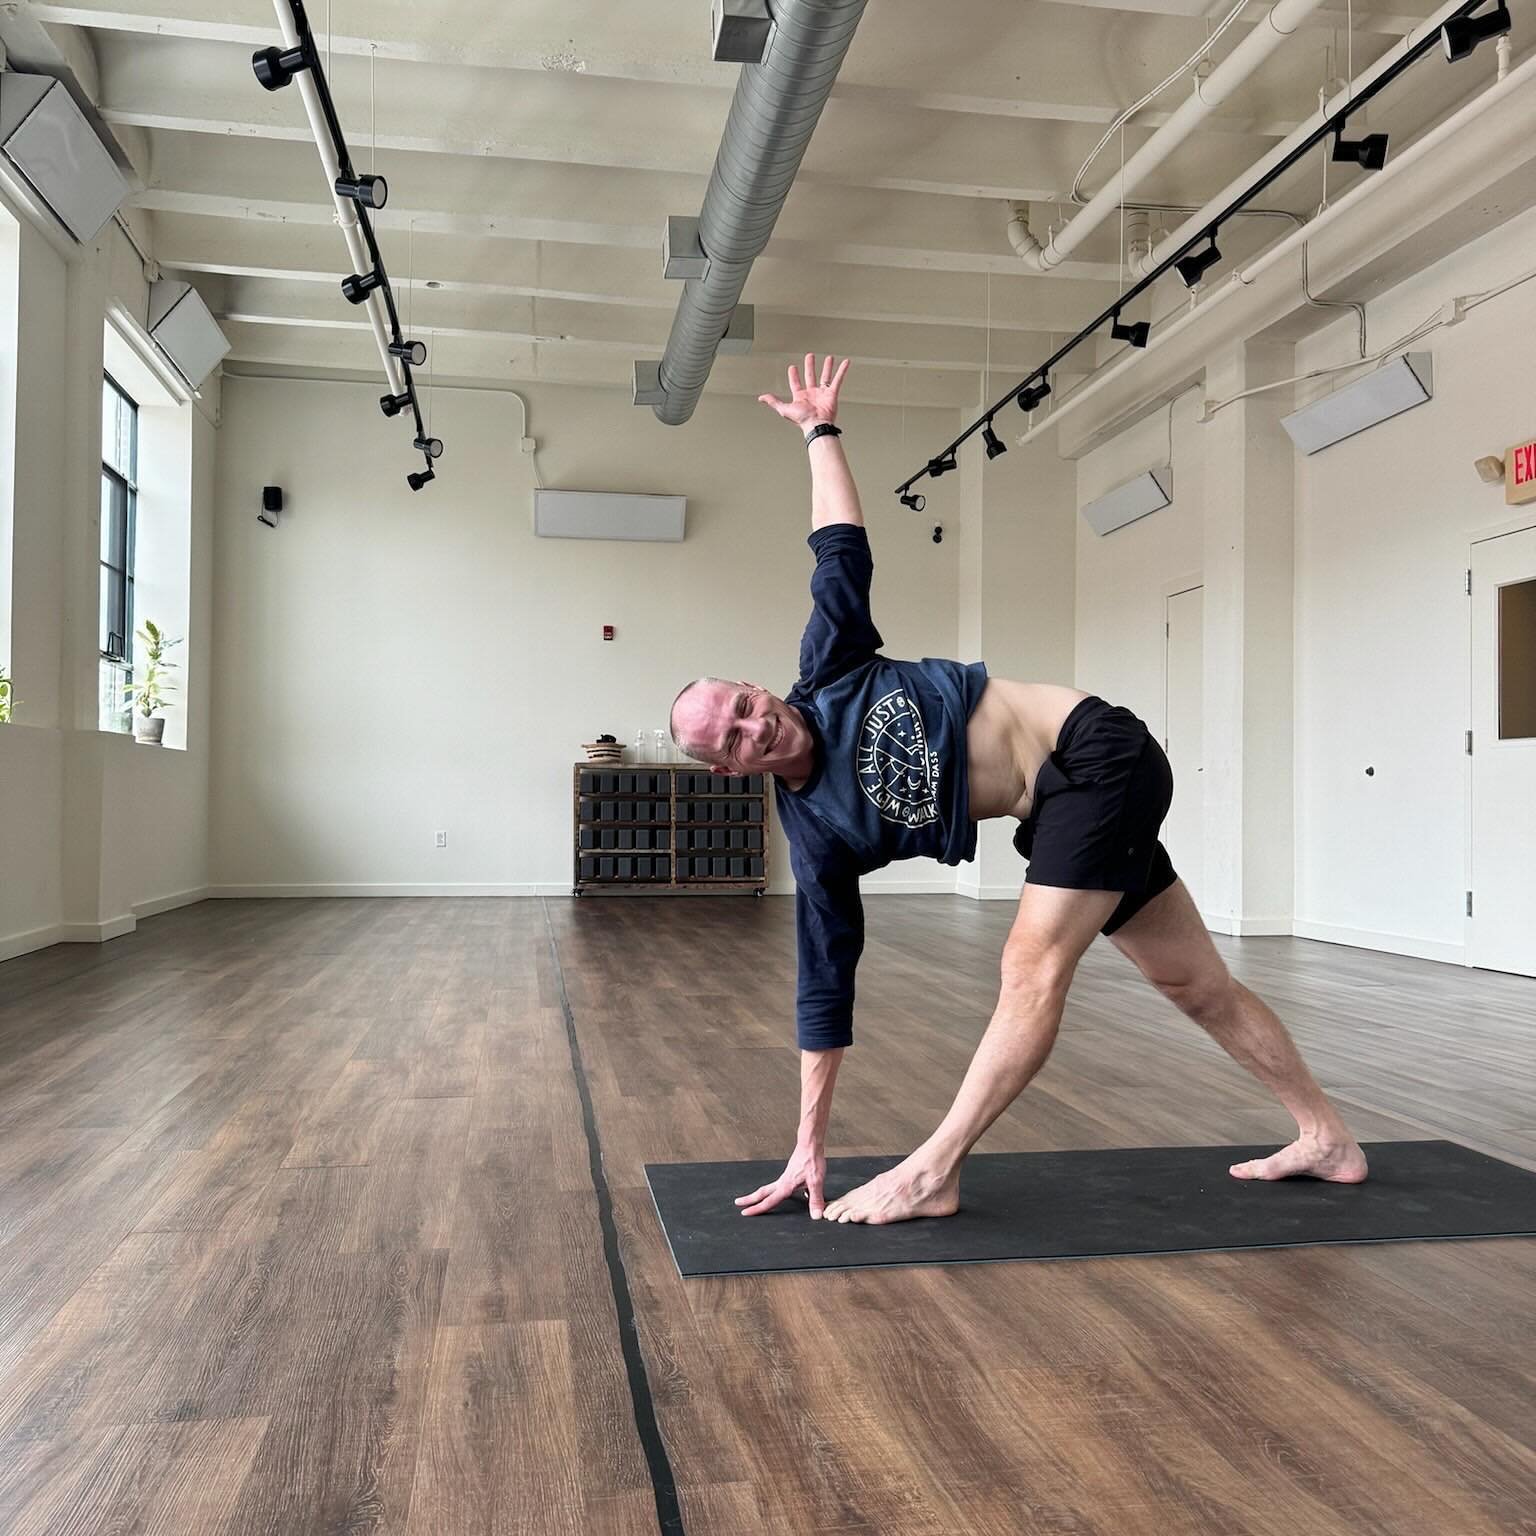 Hop into @the.real.tim.wagner Dynamic Power Flow next weekend!

Join Tim for a playful class on Saturday, May 11th from 11am - 12:30pm that will take your yoga practice to new heights. 

With a full 90 minutes, Tim will guide you on how to deepen pos